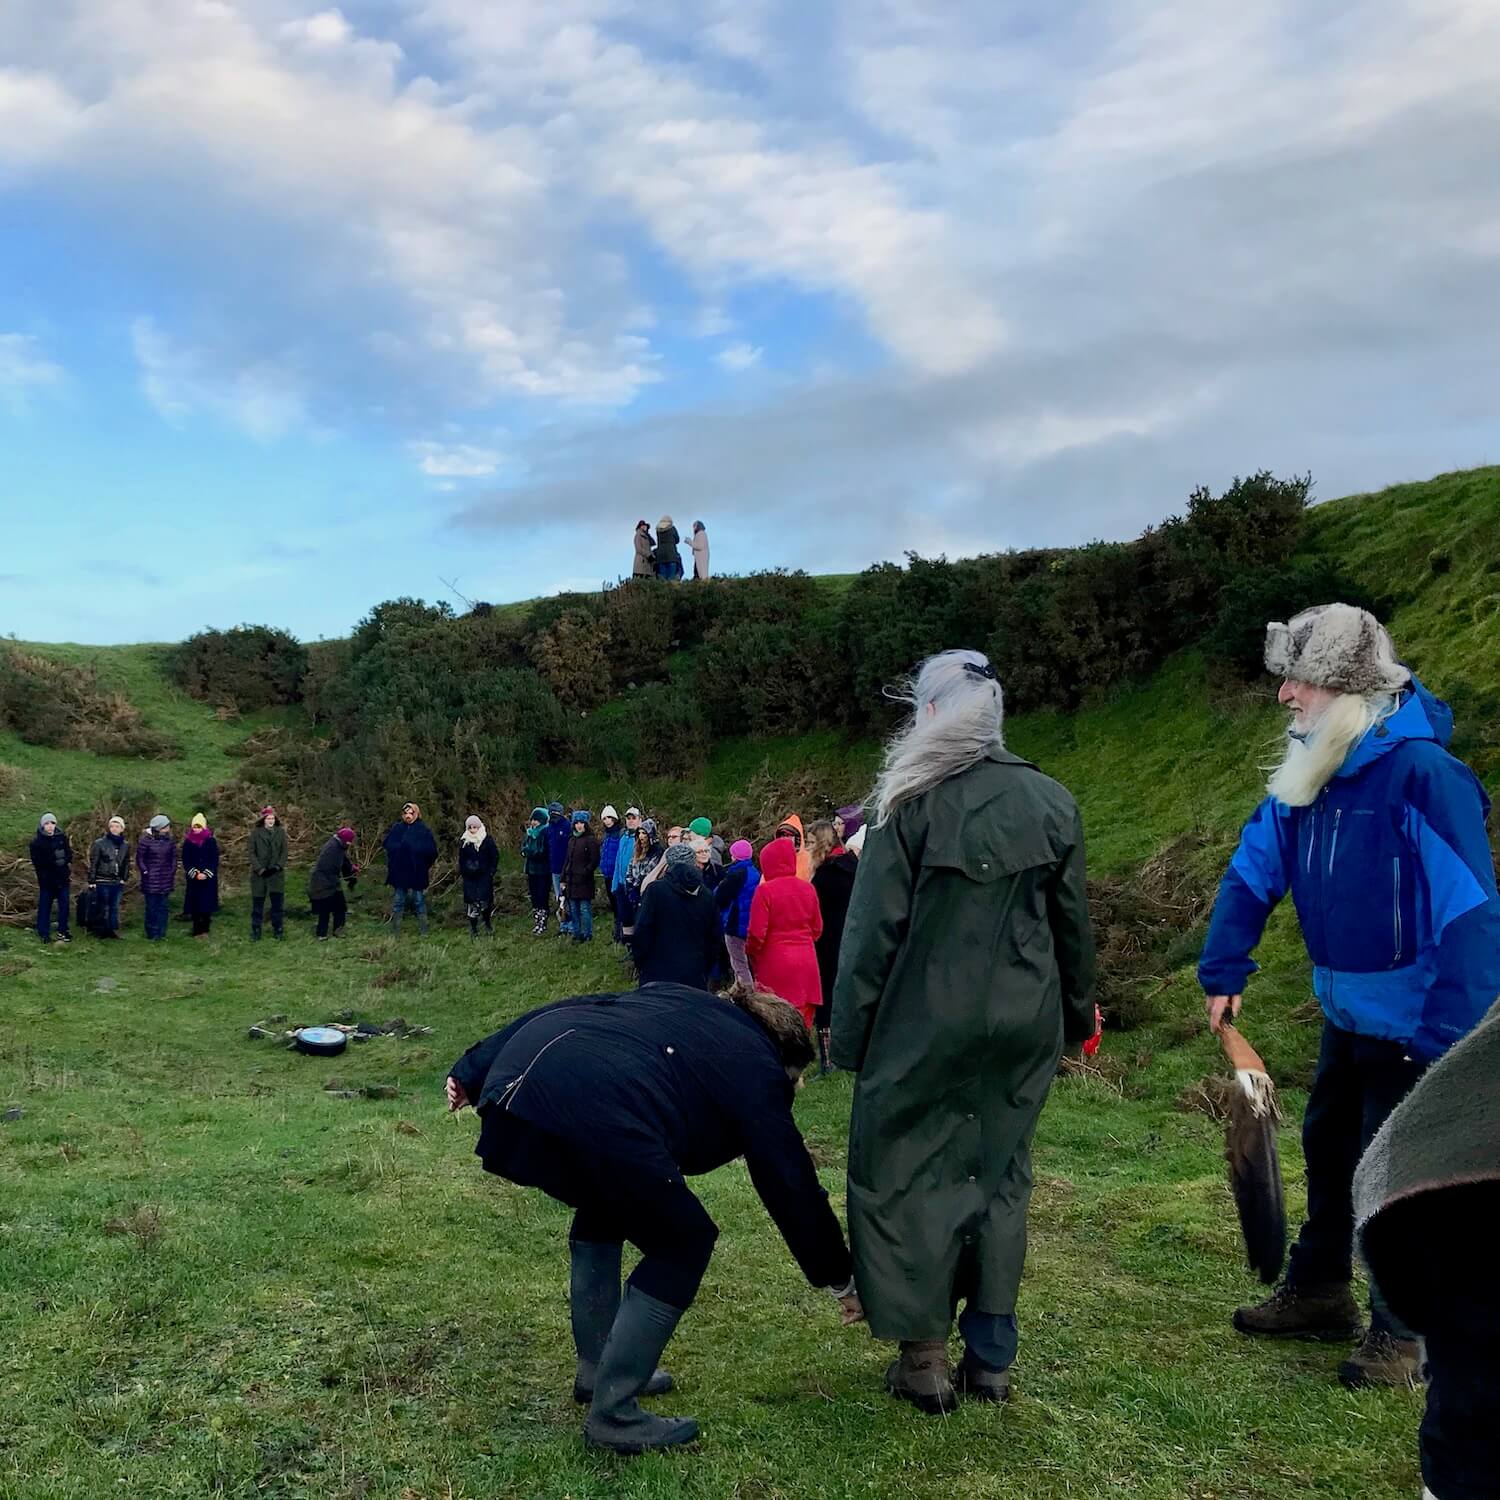 Shamen cleanse participants at the sunset ceremony in the middle of the mound at Dowth, which is a mile away from Newgrange in Ireland. The ceremony marks the start of the longest night of the year.